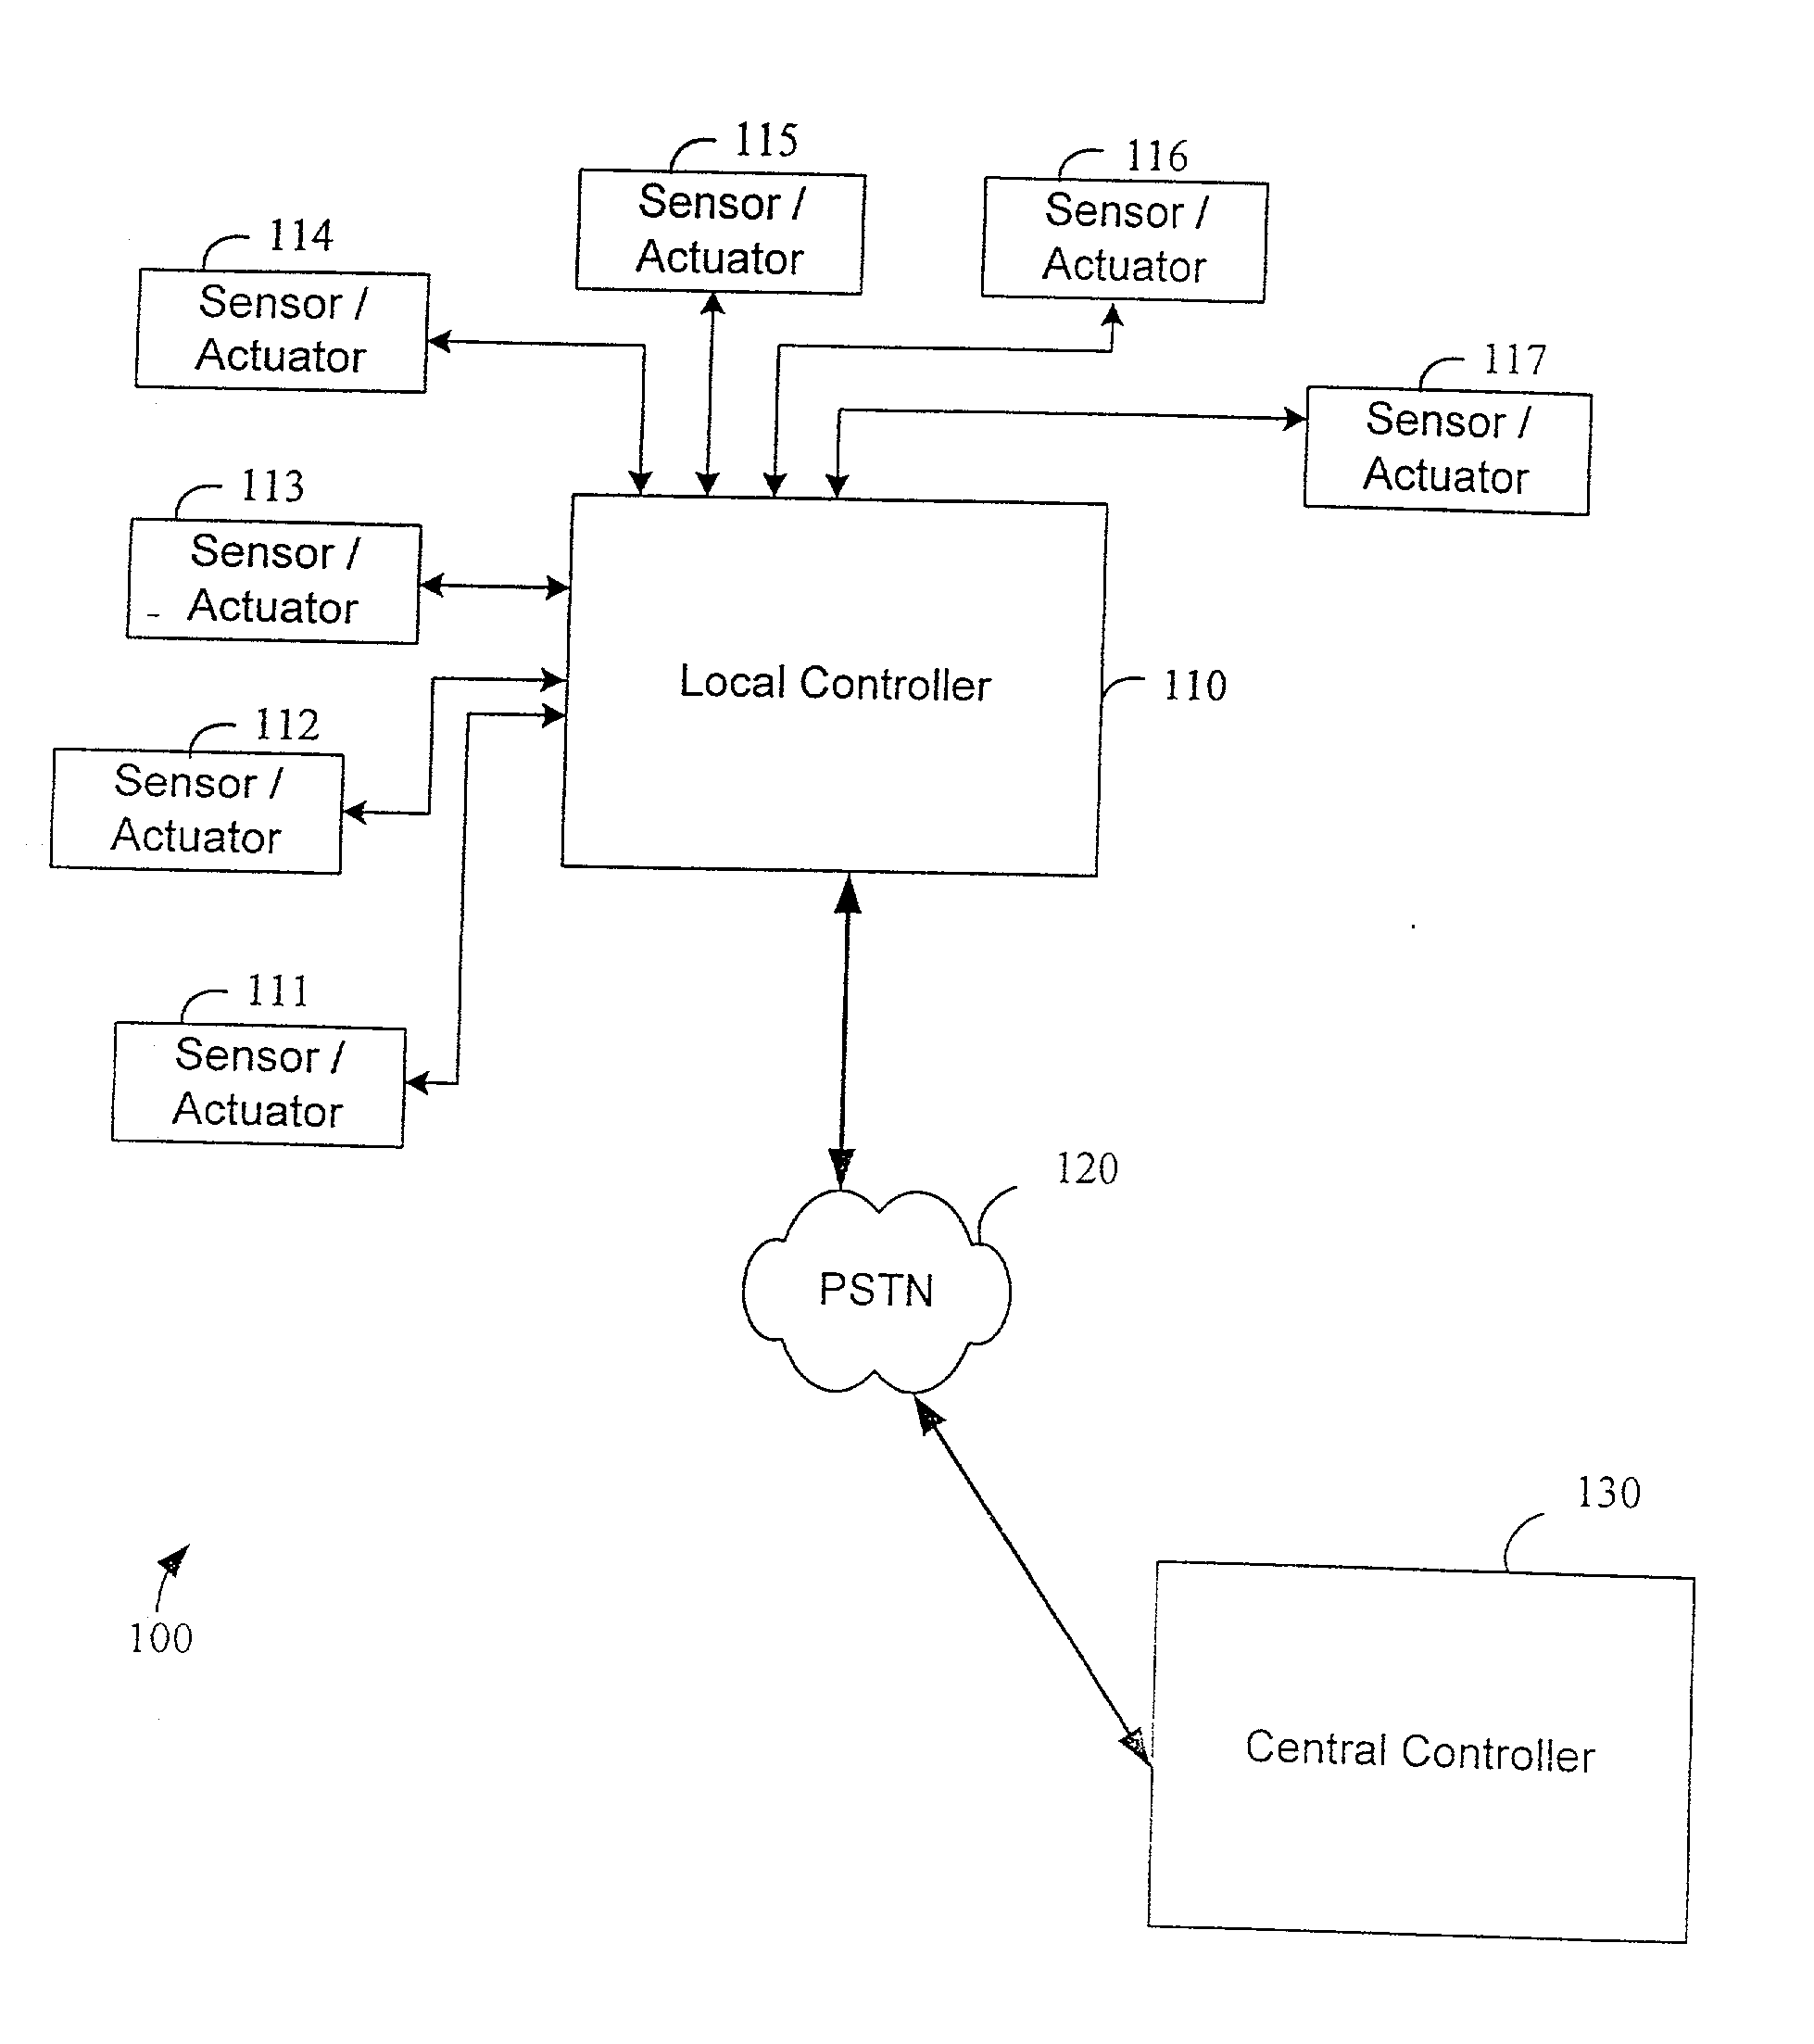 System and method for monitoring and controlling remote devices